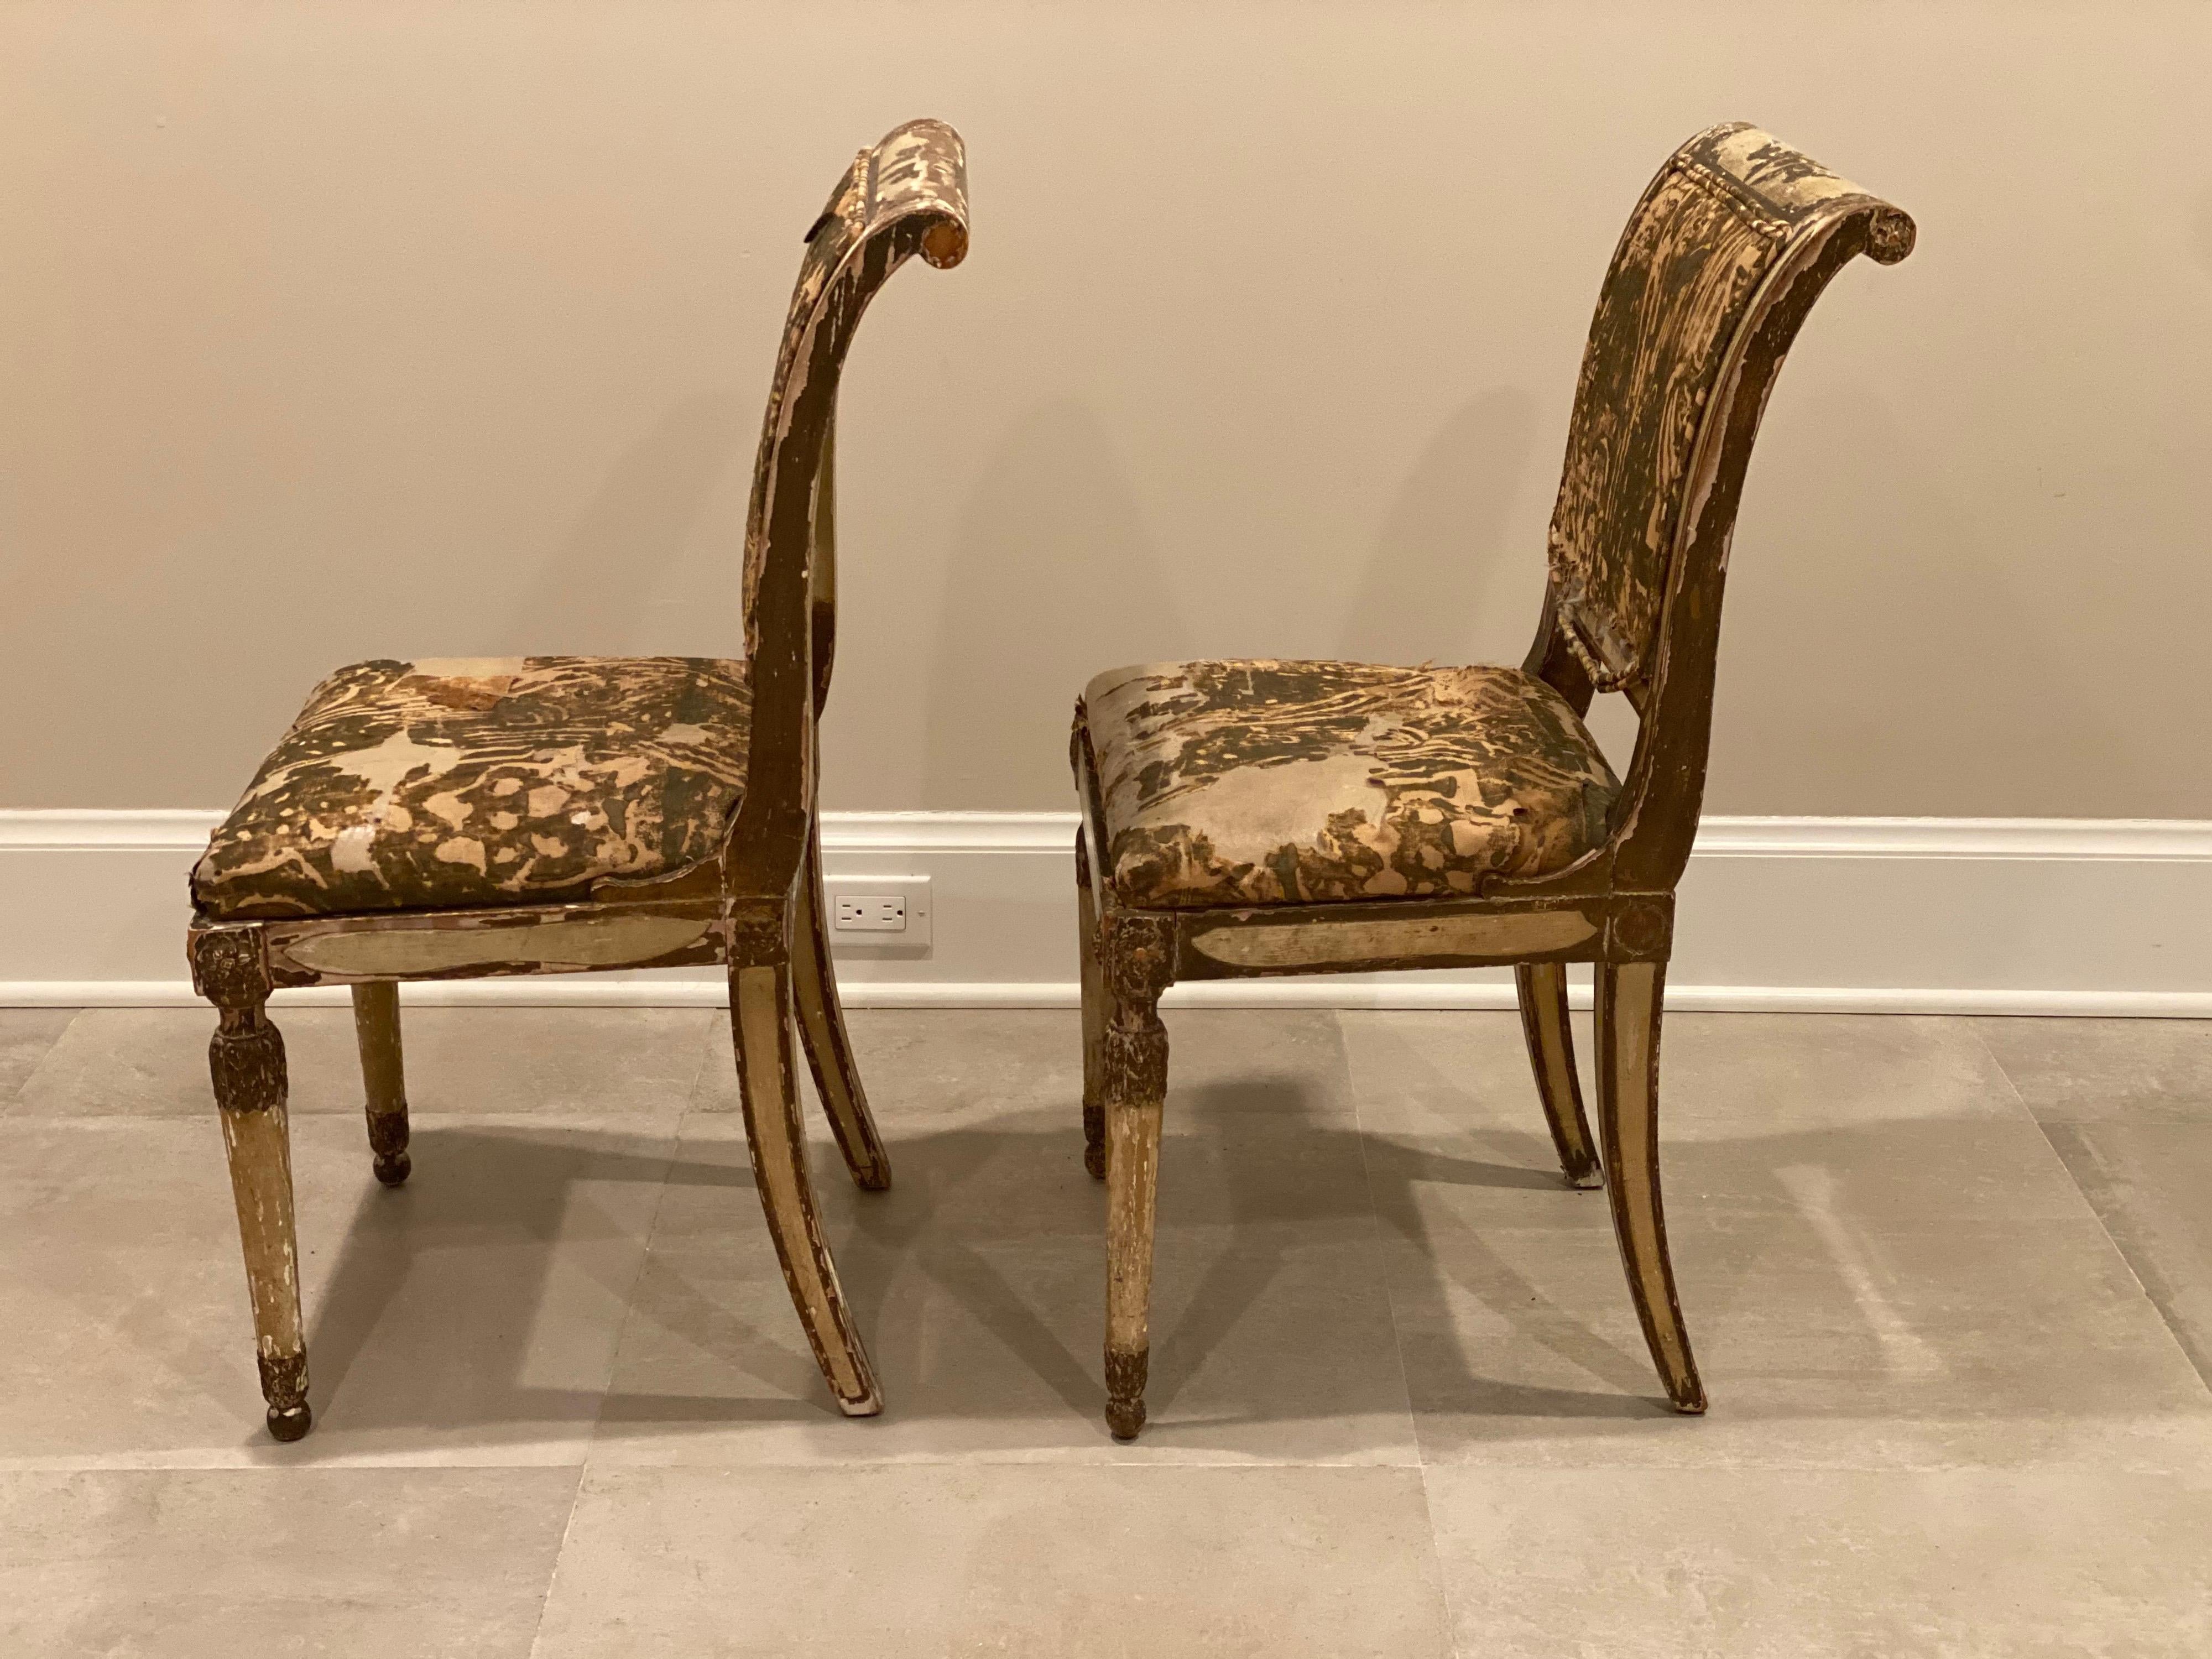 Hand-Painted Pair of Italian Neoclassical Style Painted & Gilt Side Chairs, 19th Century